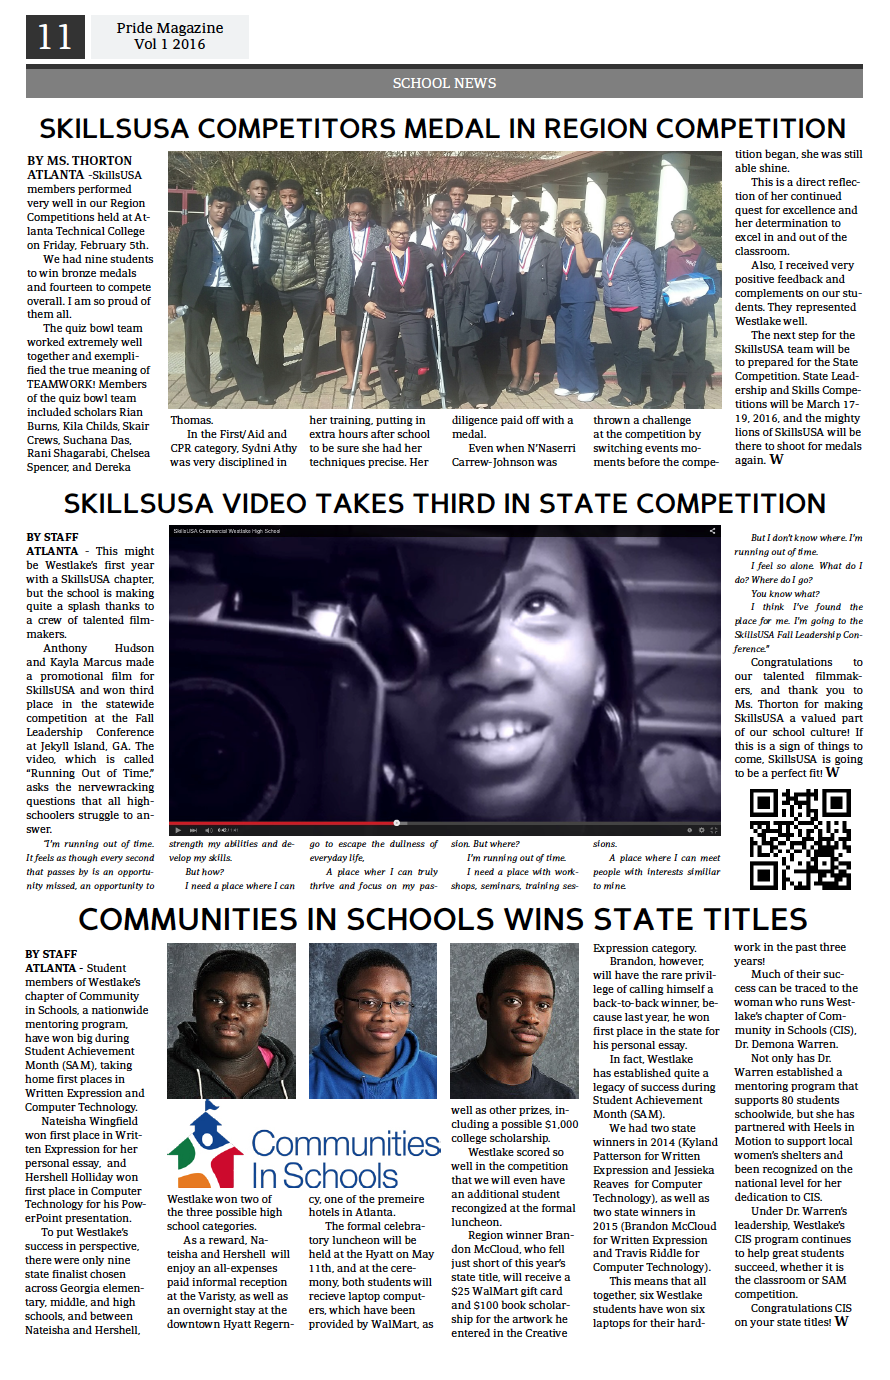 Newspaper Preview 011.png